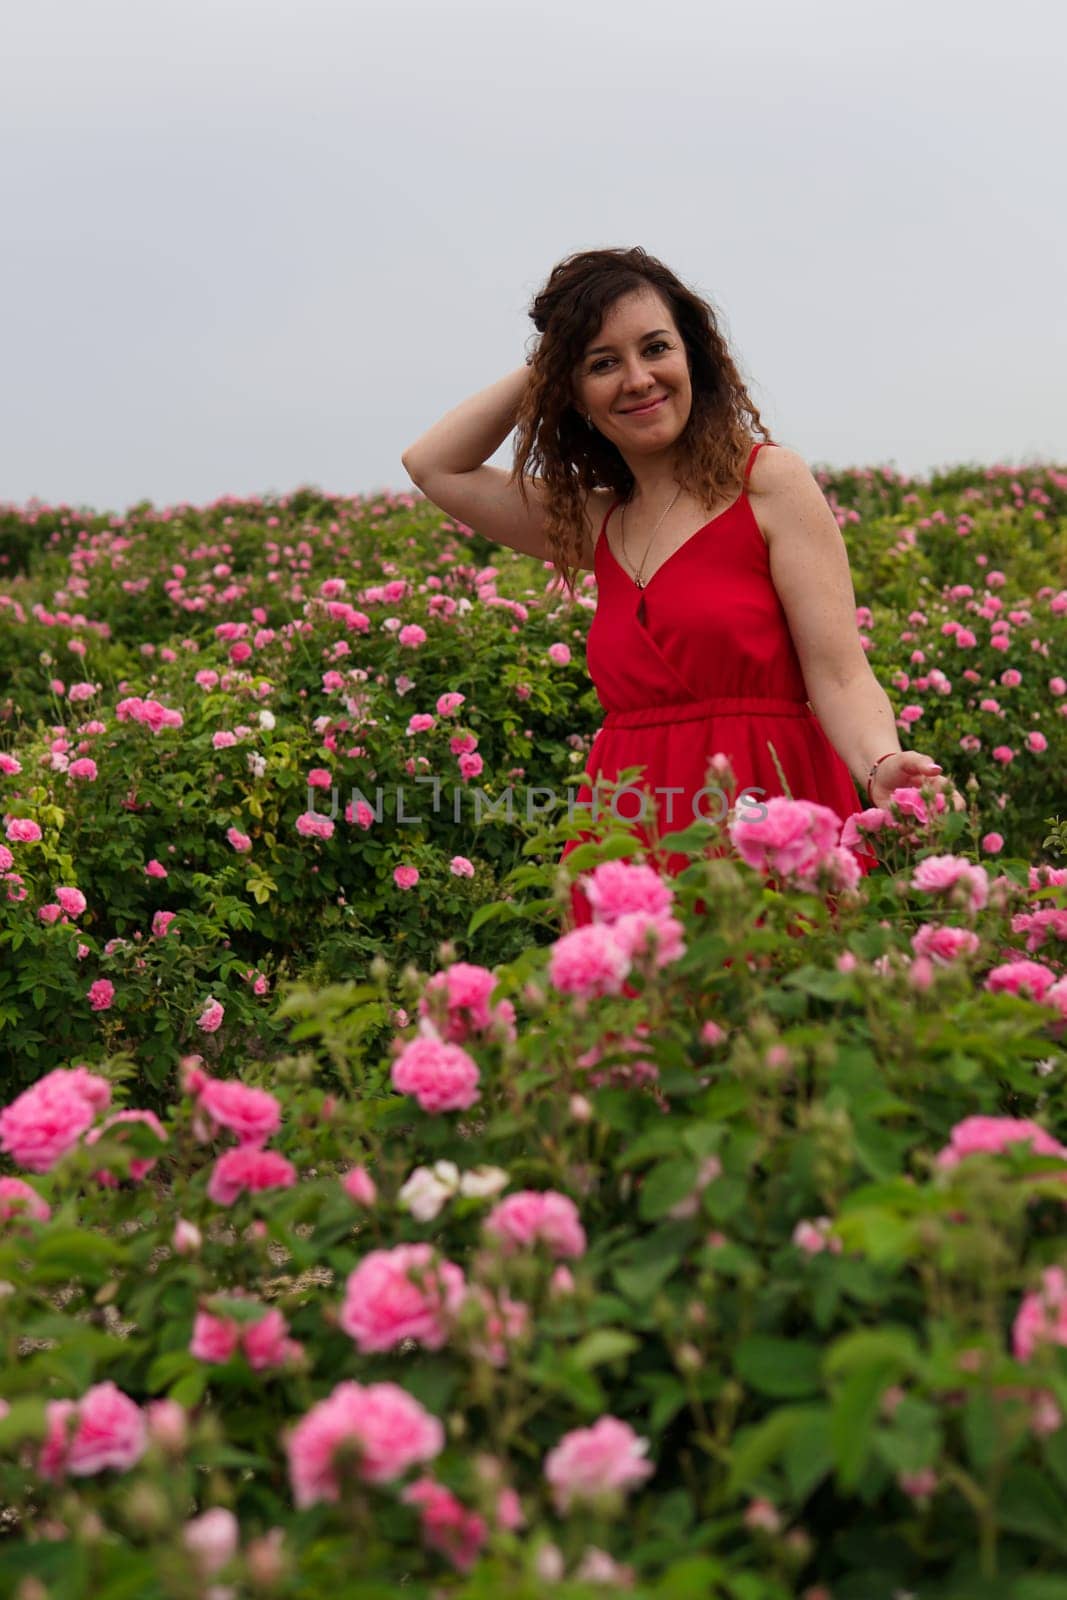 Beautiful woman in red dress on a field of blossoming roses by Simakov